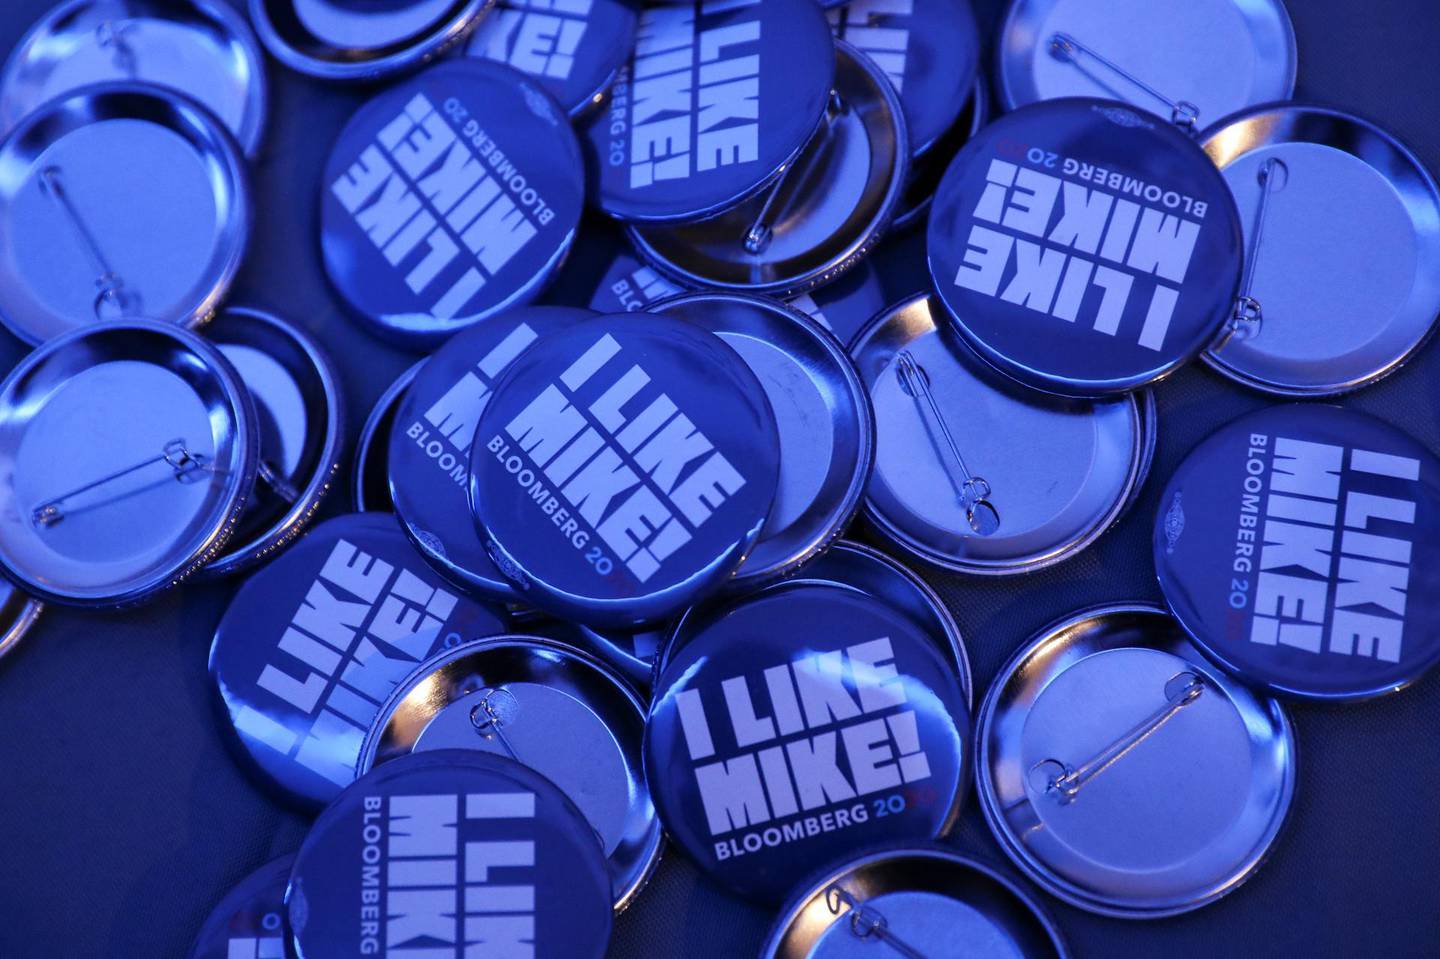 Buttons for Democratic presidential candidate Michael Bloomberg are seen at his campaign office in the Brooklyn borough of New York City, New York, U.S., February 19, 2020. Picture taken February 19, 2020. REUTERS/Caitlin Ochs